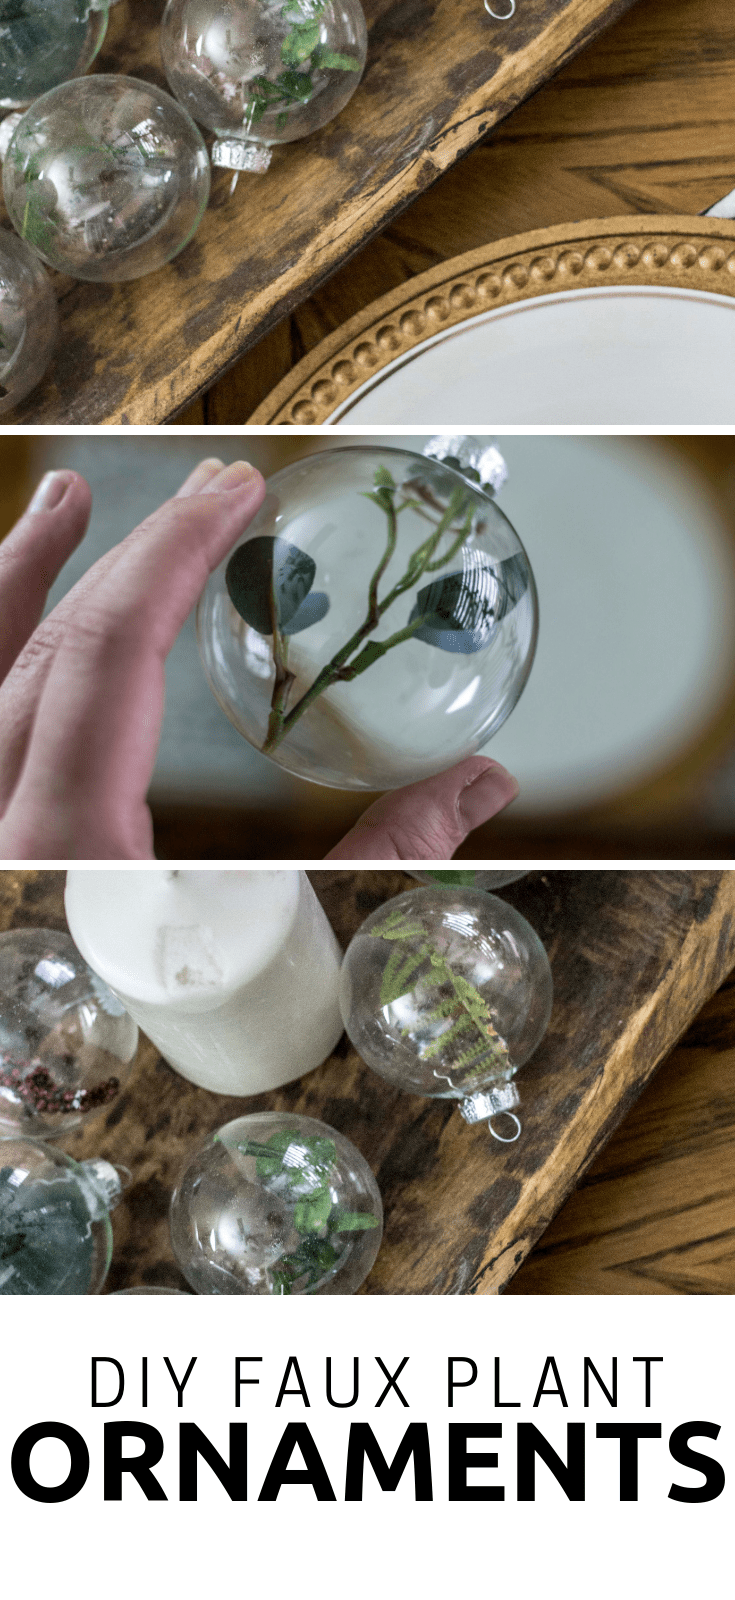 Recycle leftover greenery with these DIY ornaments